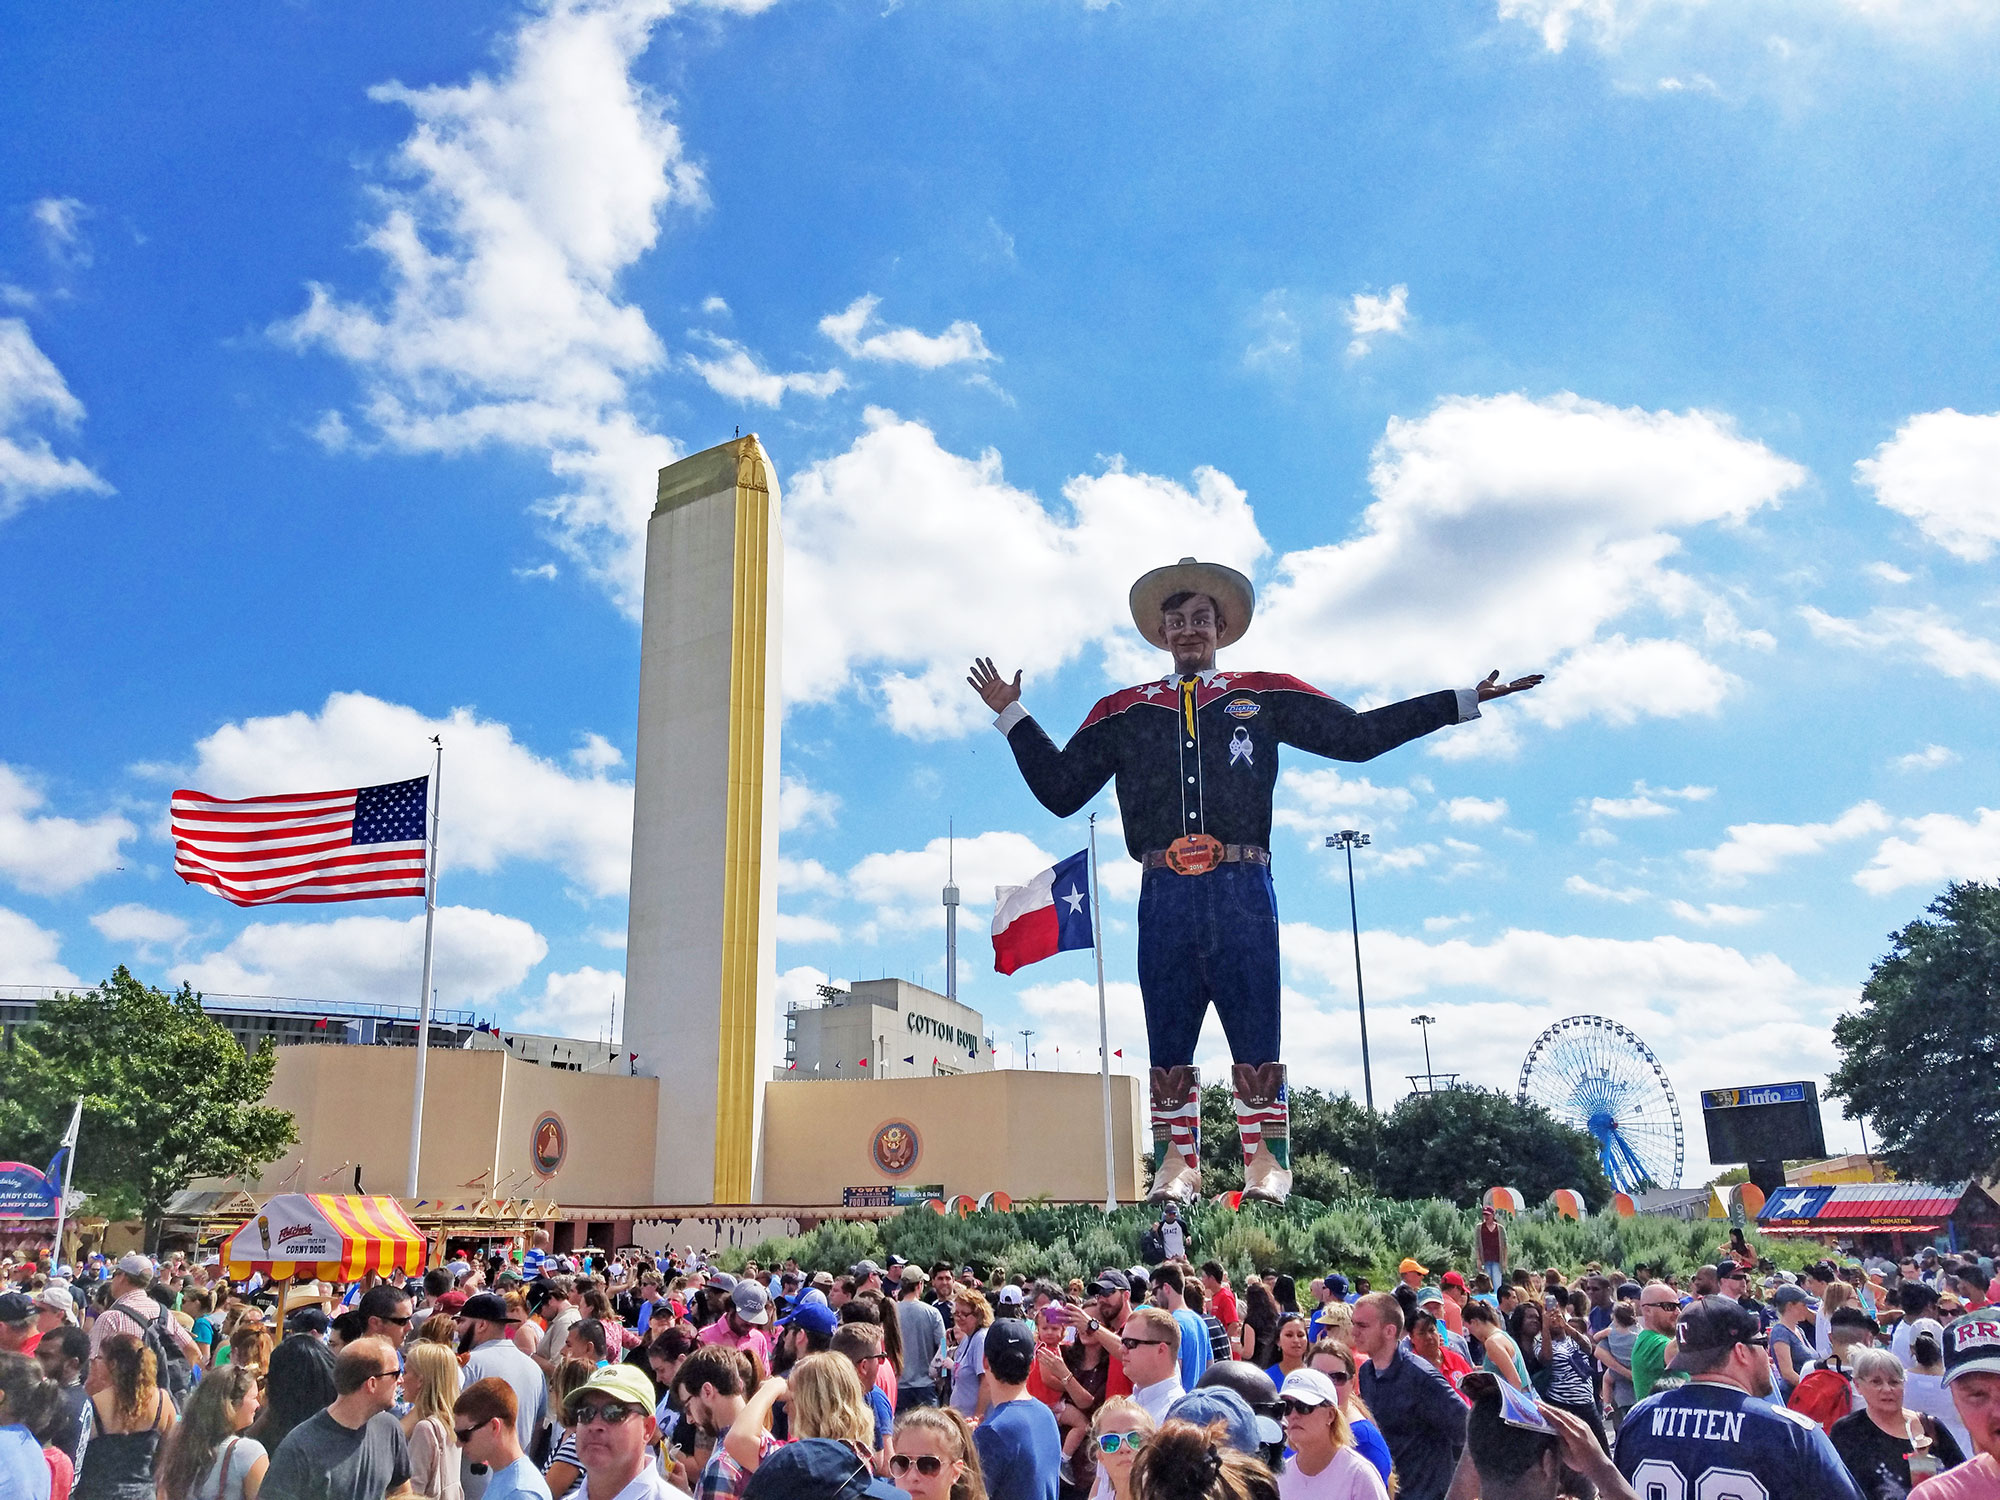 Big Tex at the State Fair of Texas.